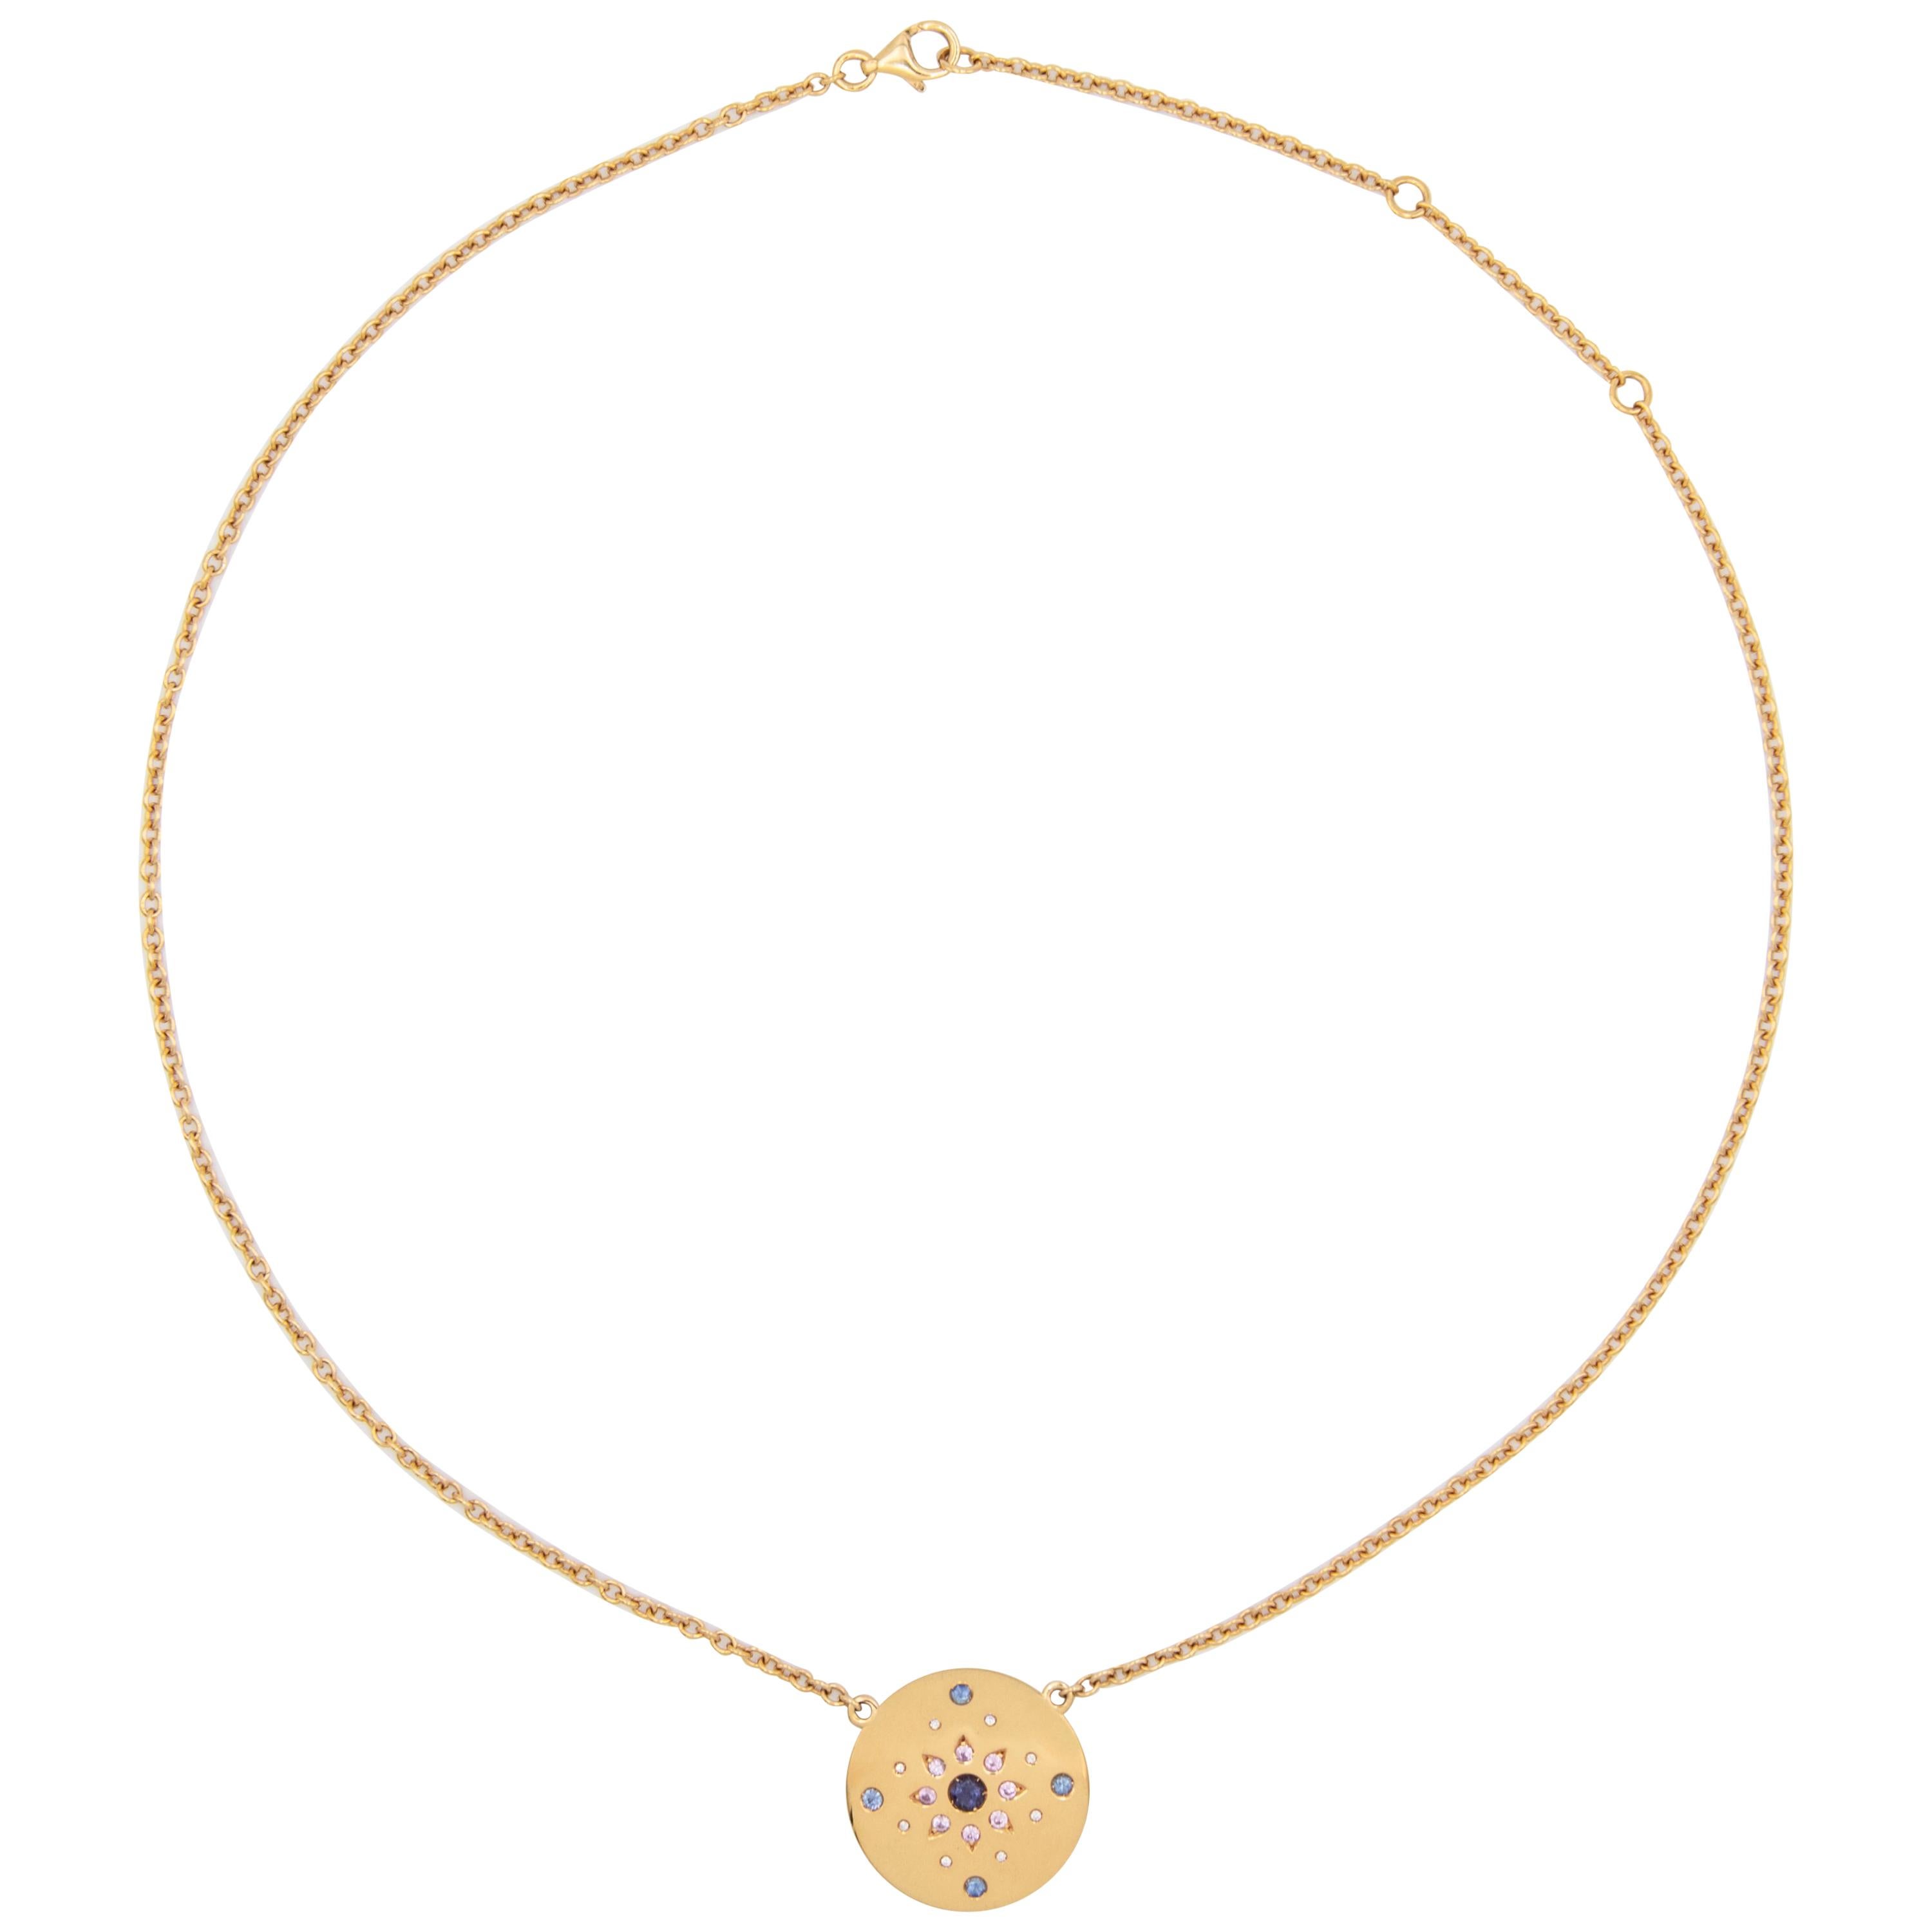 18 karat yellow gold necklace with round disc pendant and adjustable chain. The pendant is set with 0,59-carat of diamonds.

Please note that the necklace described corresponds to the first picture of this listing. The same necklace model is also